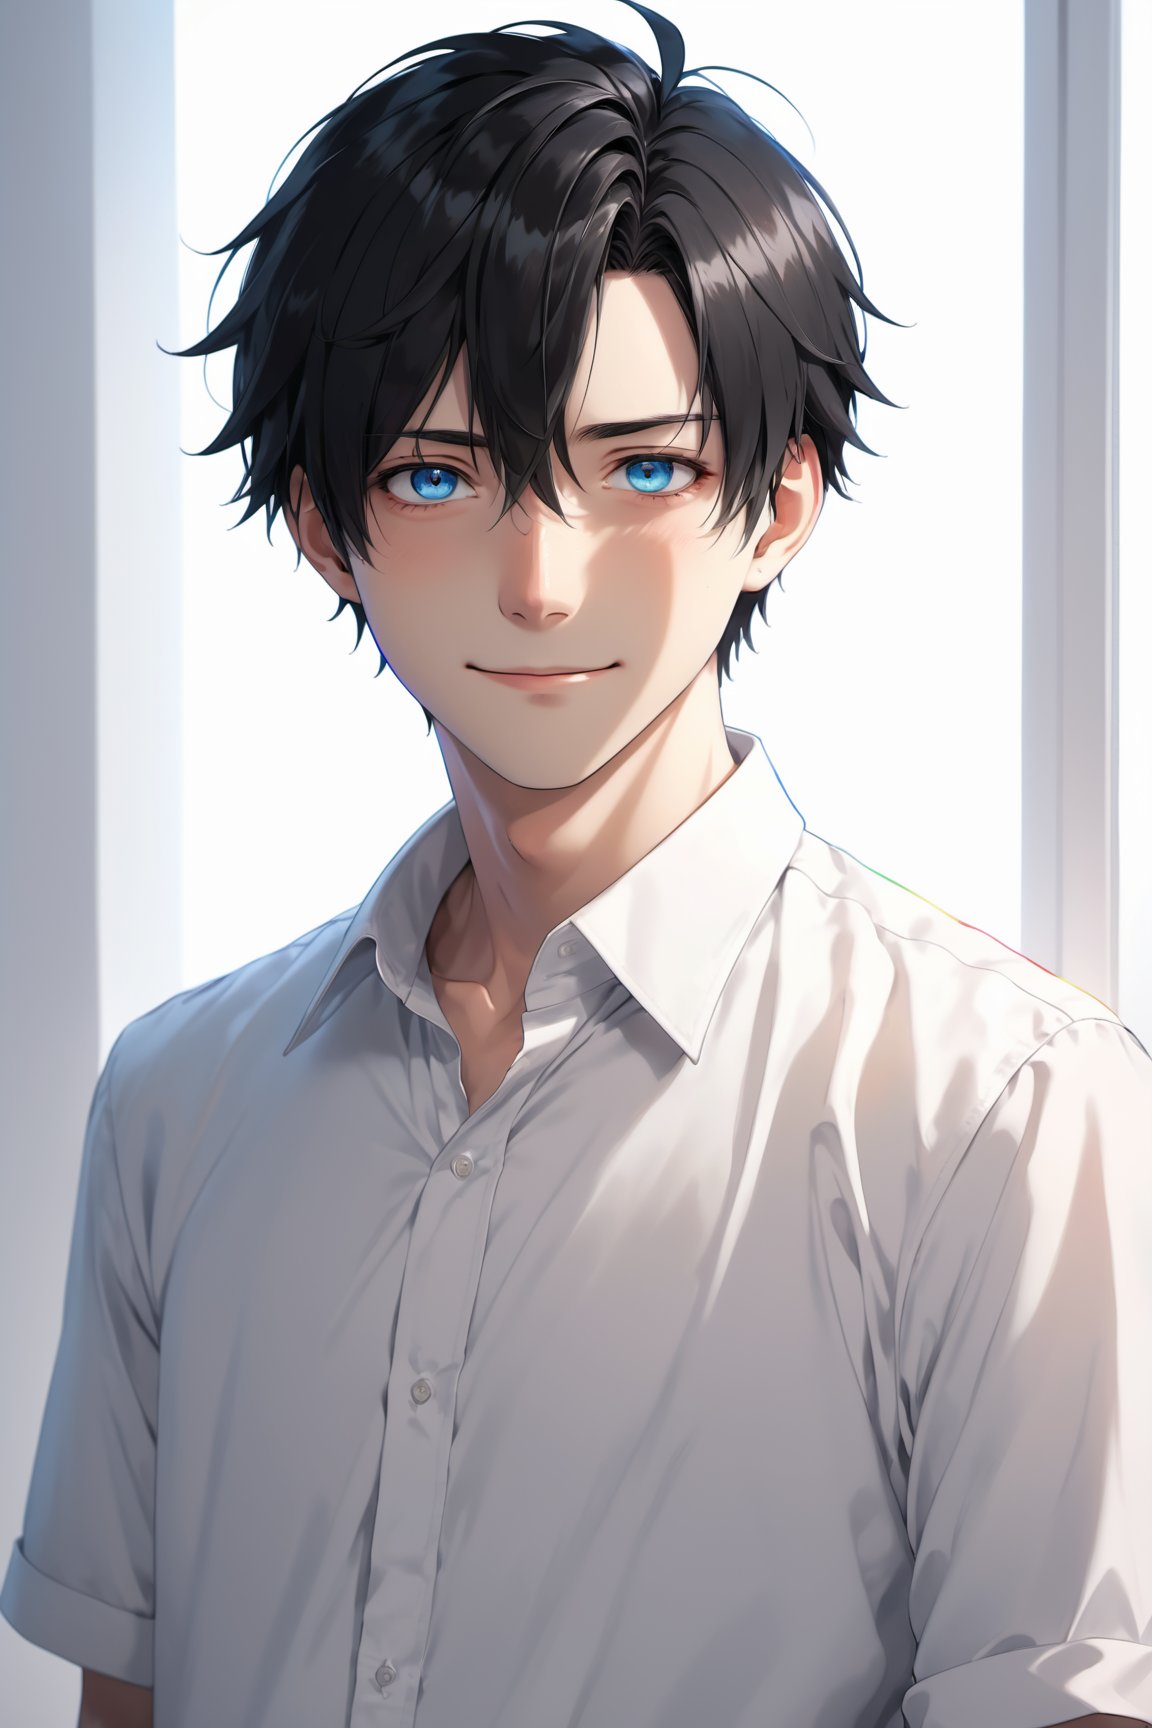 a smile,White room background,Black hair, Anime style, Character Chart, One-person viewpoint,white shirt,Anime Boy, young anime man, anime moe art style, Anime Boy, Smooth Anime CG Art, Male anime style, artwork in the style of guweiz, A cute boy,rainbows,Anime portrait of a handsome man, digital anime illustration, Short anime guy with blue eyes, male anime characters, boy has short black hair,nffsw,


,Anime 